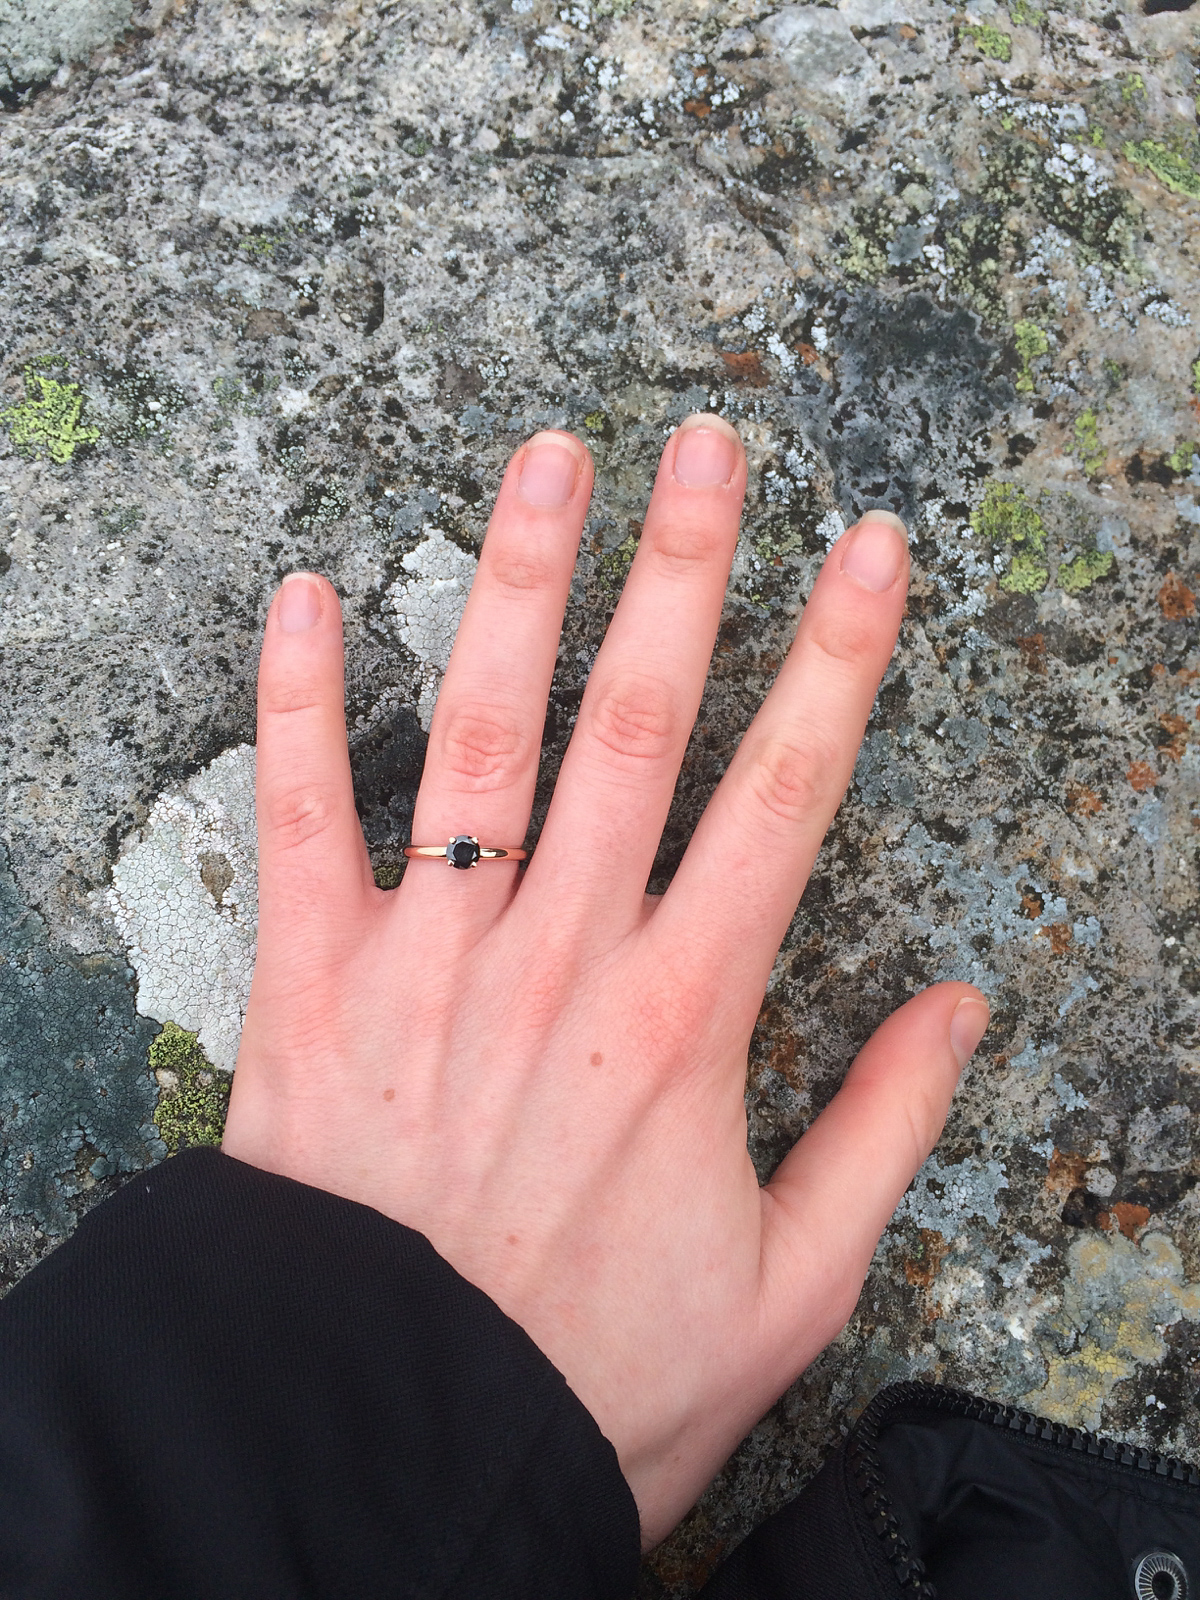 Eve and Adam's proposal story. If you would like to share your engagement story on Love My Dress - get in touch! Details at the end of this feature.